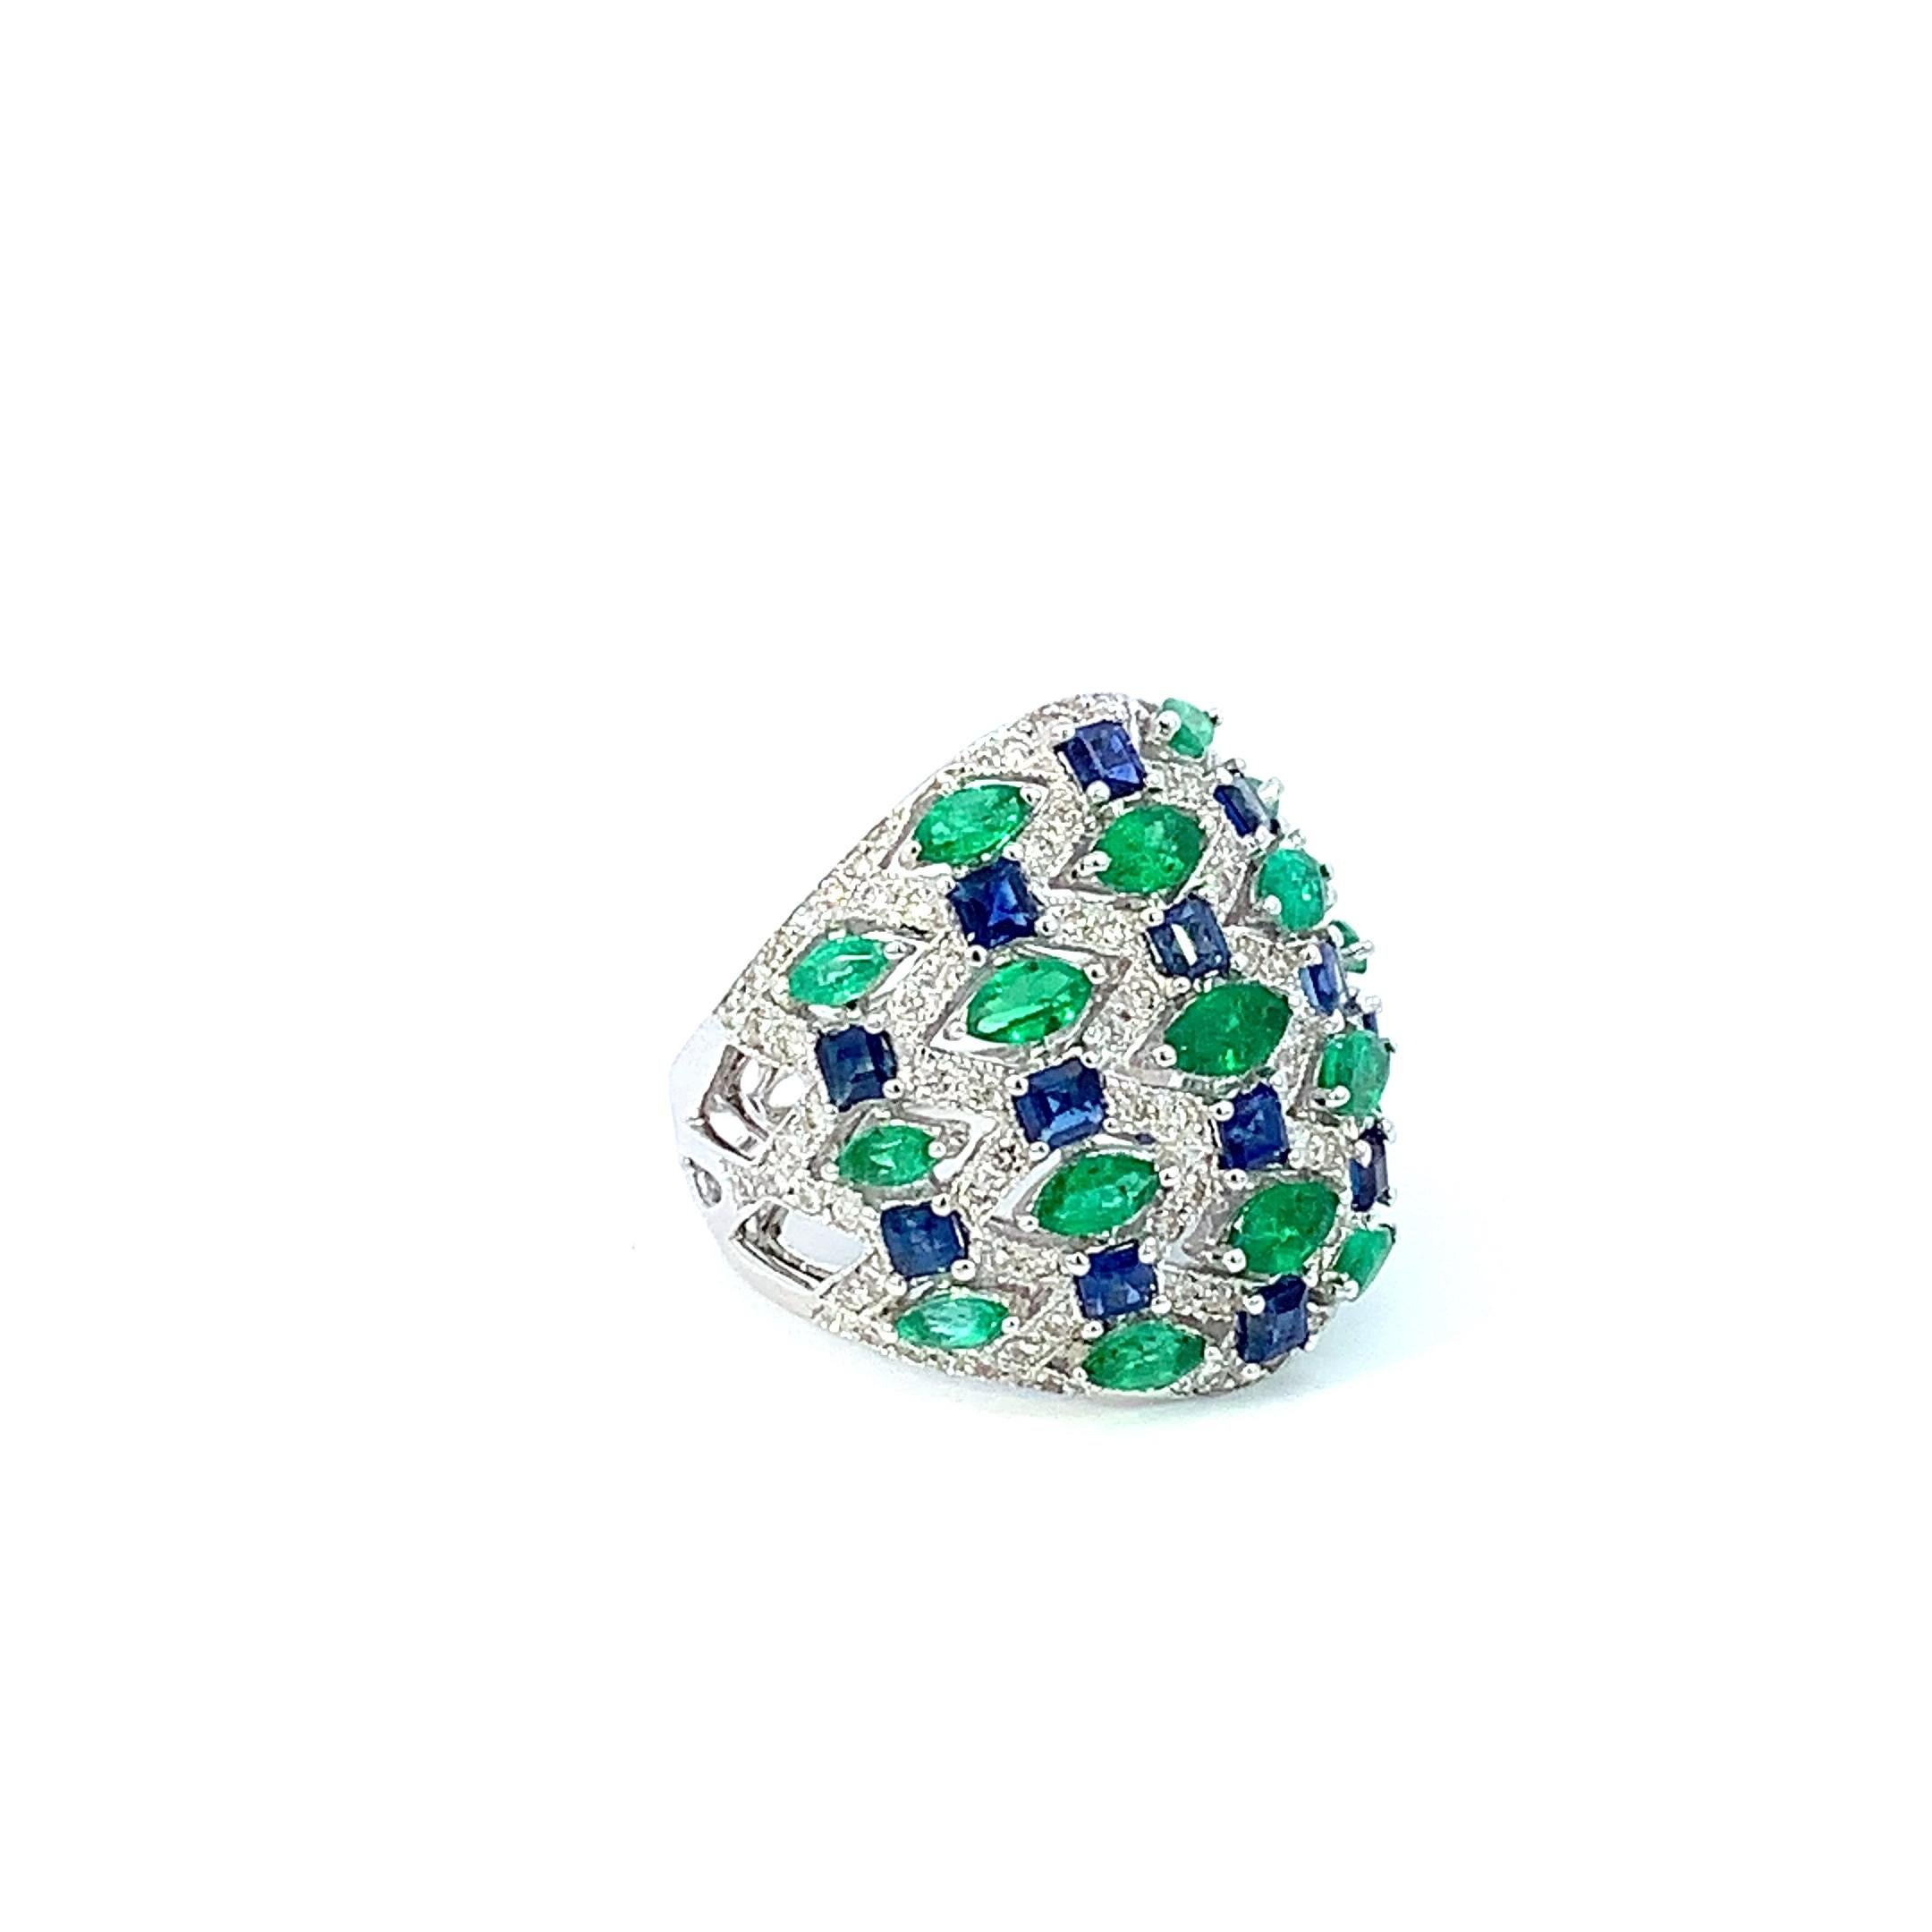 Modern White Diamond 1.4 Carat, Emerald, & Sapphire 2.80 Carats in 18K Gold RING For Sale